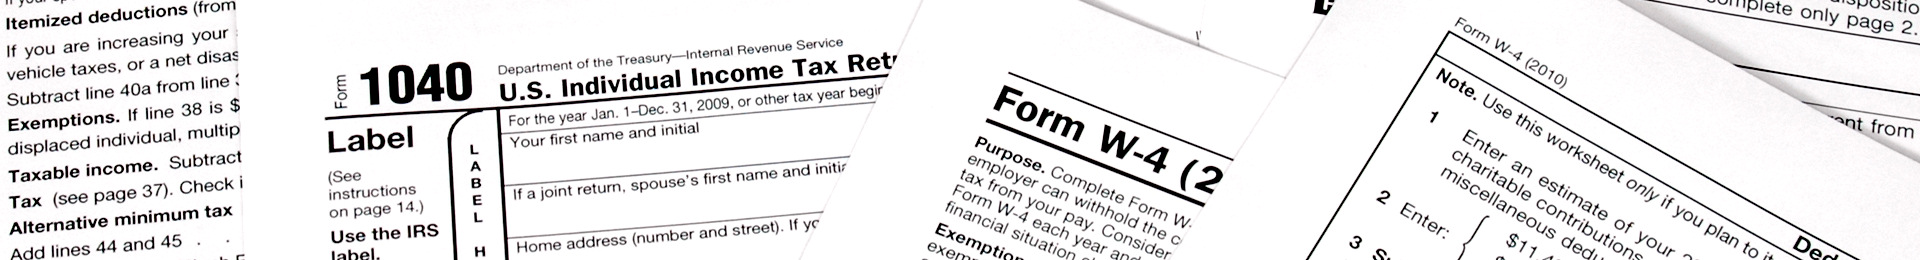 Image: Selected IRS tax forms.